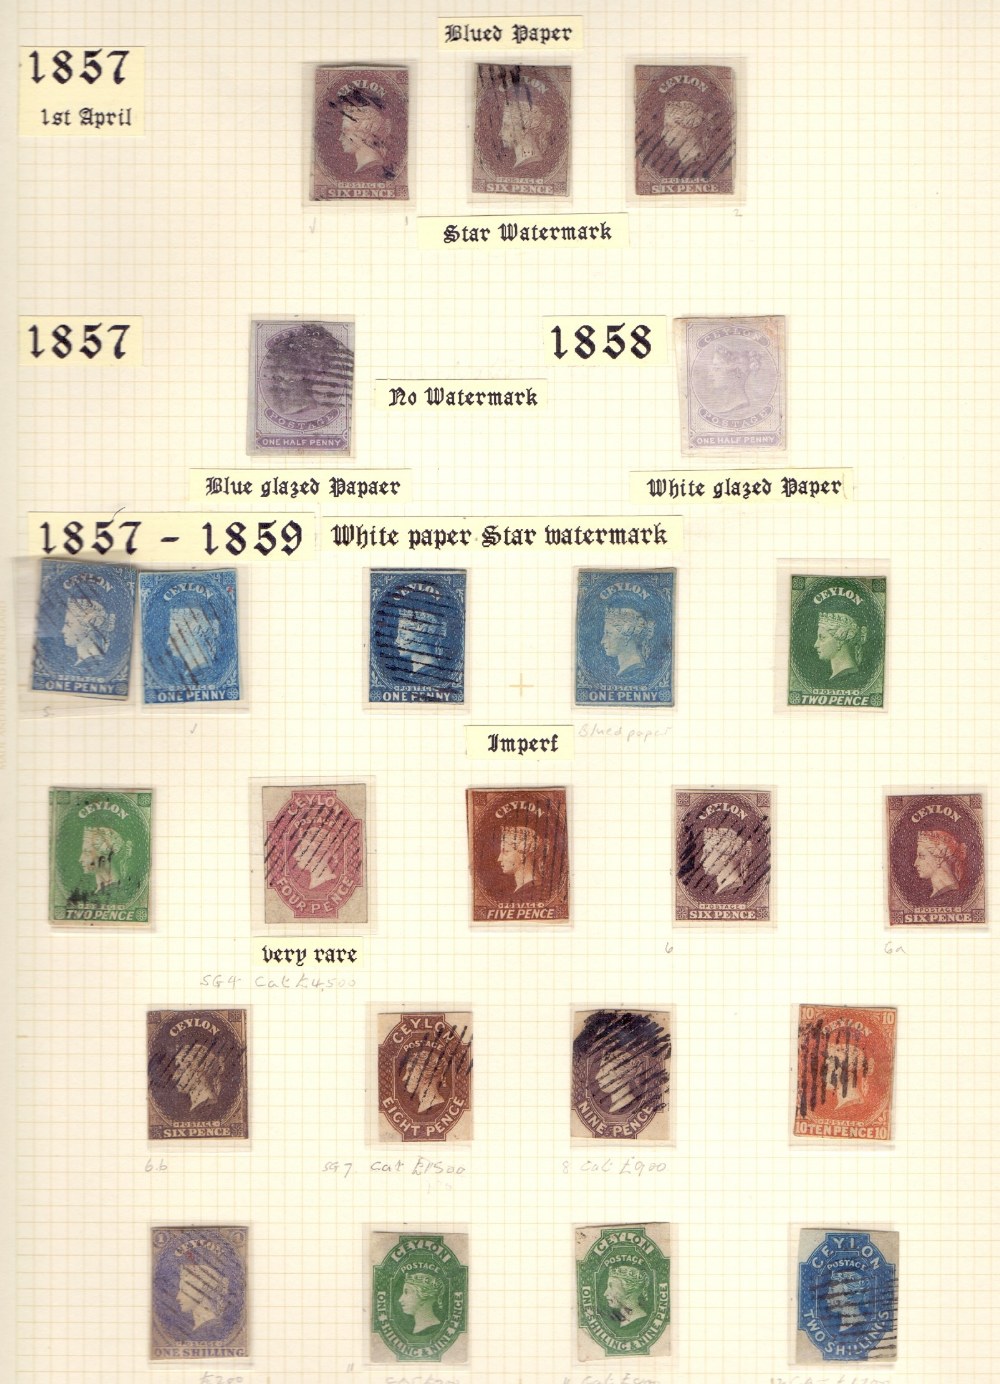 CEYLON STAMPS : A comprehensive mint & used collection inc 1857 issues inc 6d (blued paper), - Image 7 of 10